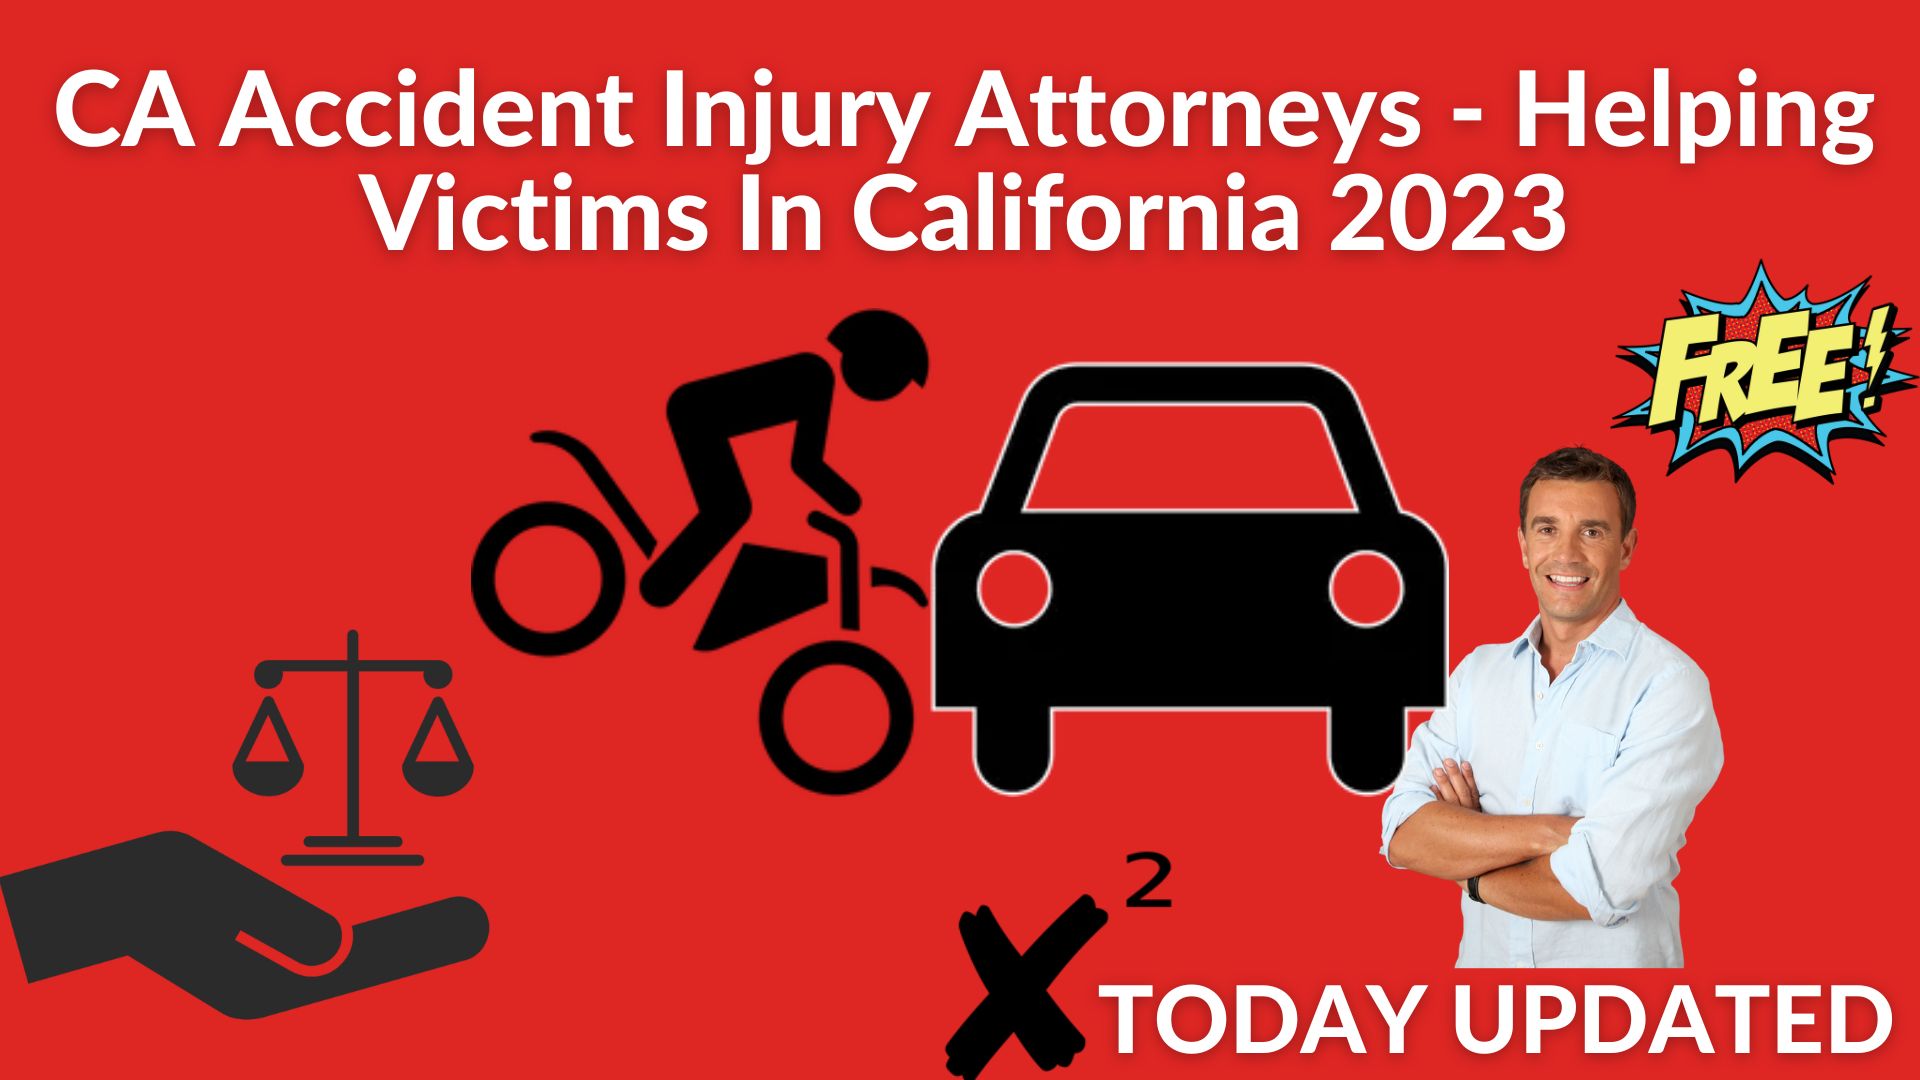 Ca accident injury attorneys - helping victims in california 2023